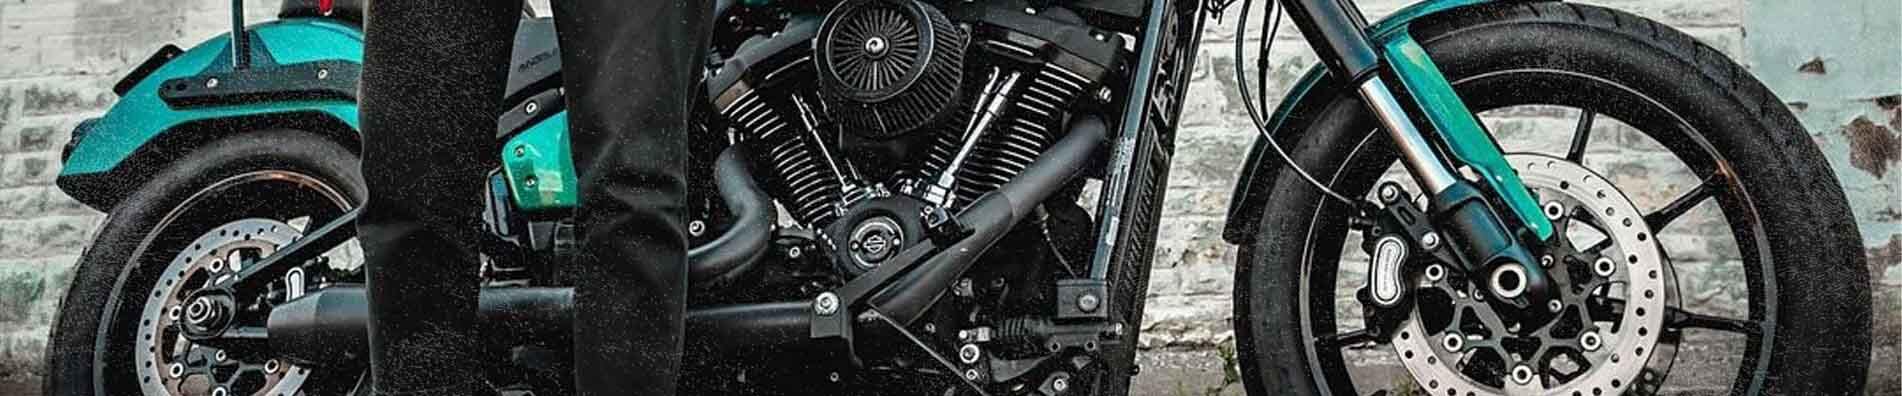 Harley Softail Parts - Lucky Speed Shop